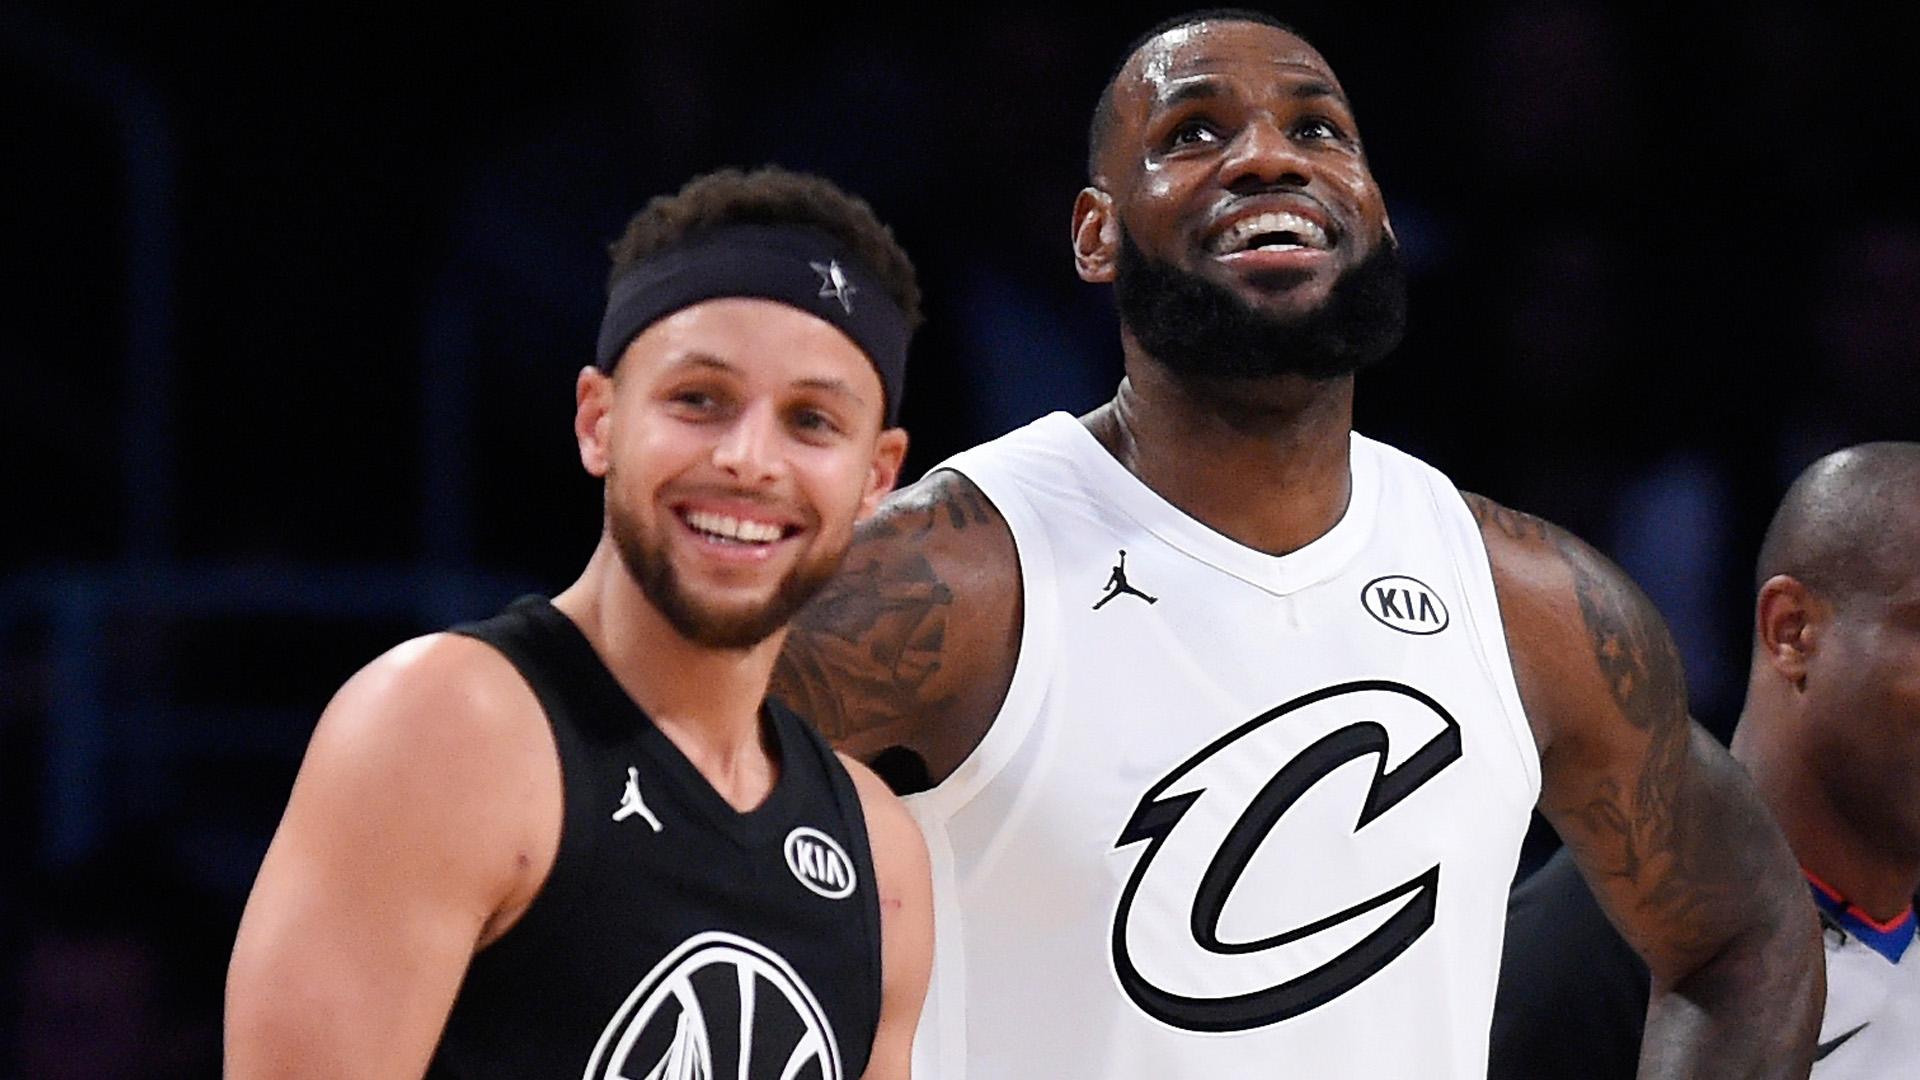 Steph Curry supports LeBron James: 'Keep doing you'. NBCS